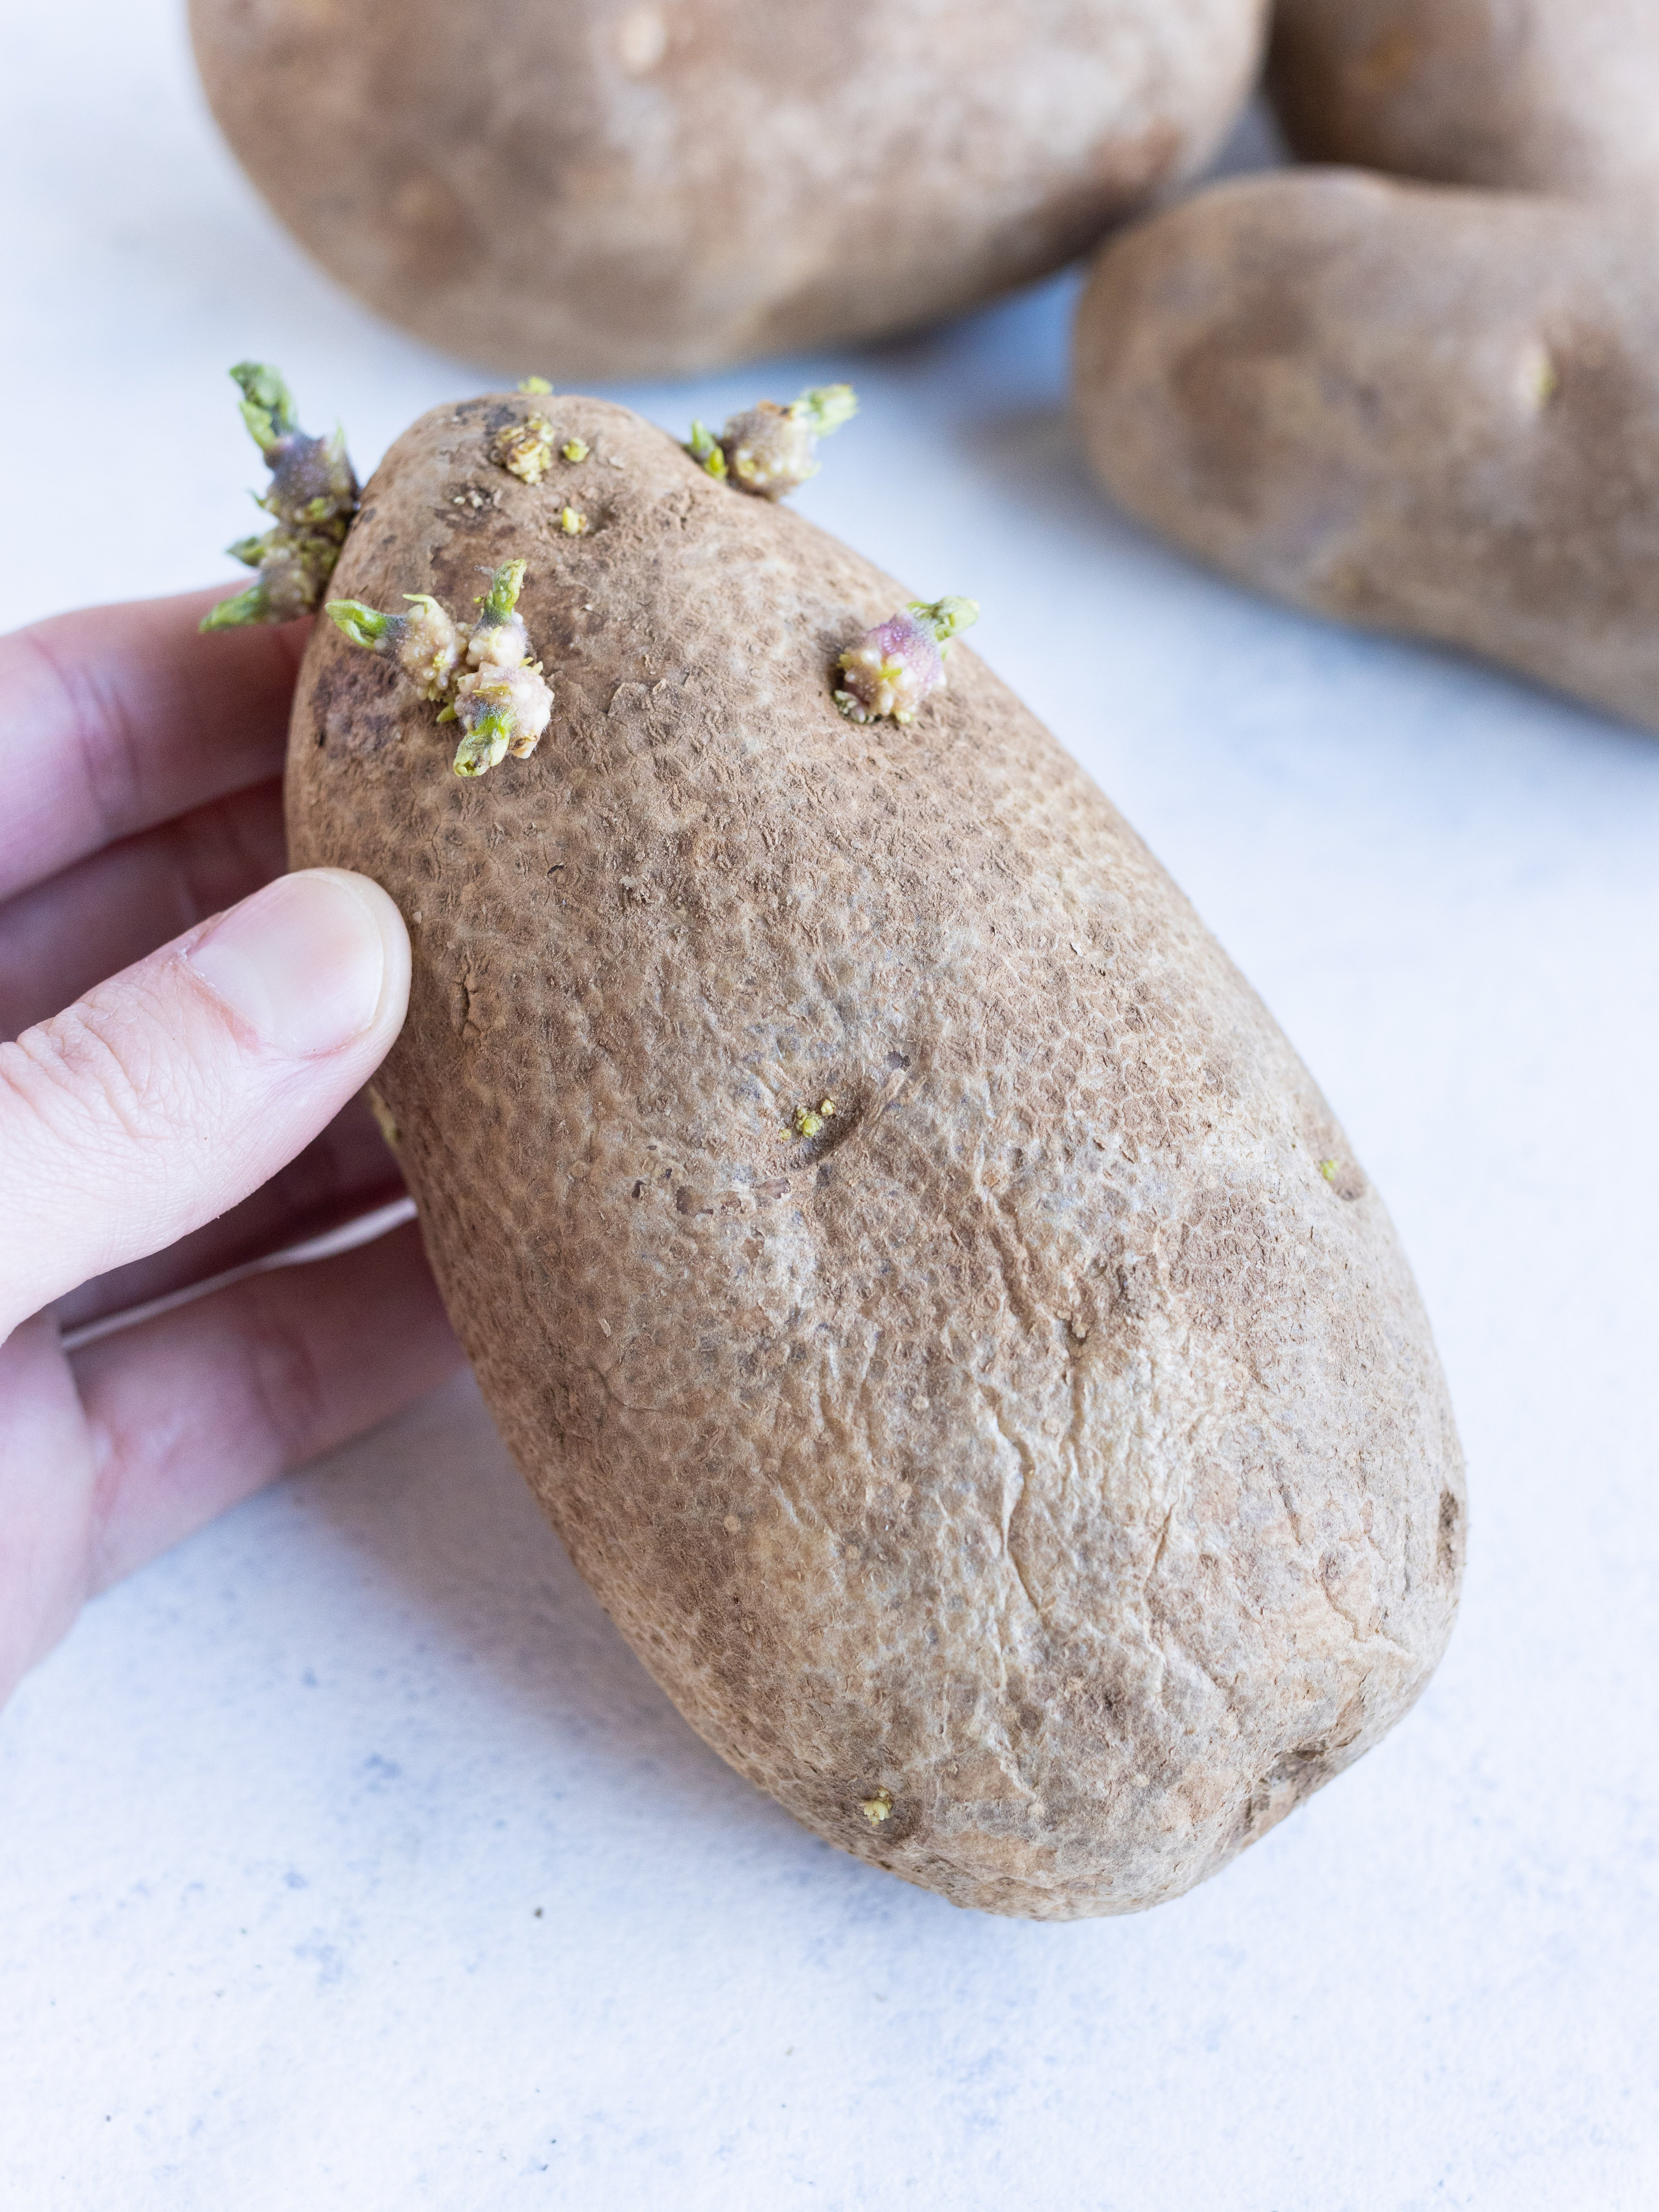 Someone holding a sprouted potato with other potatoes in the background.